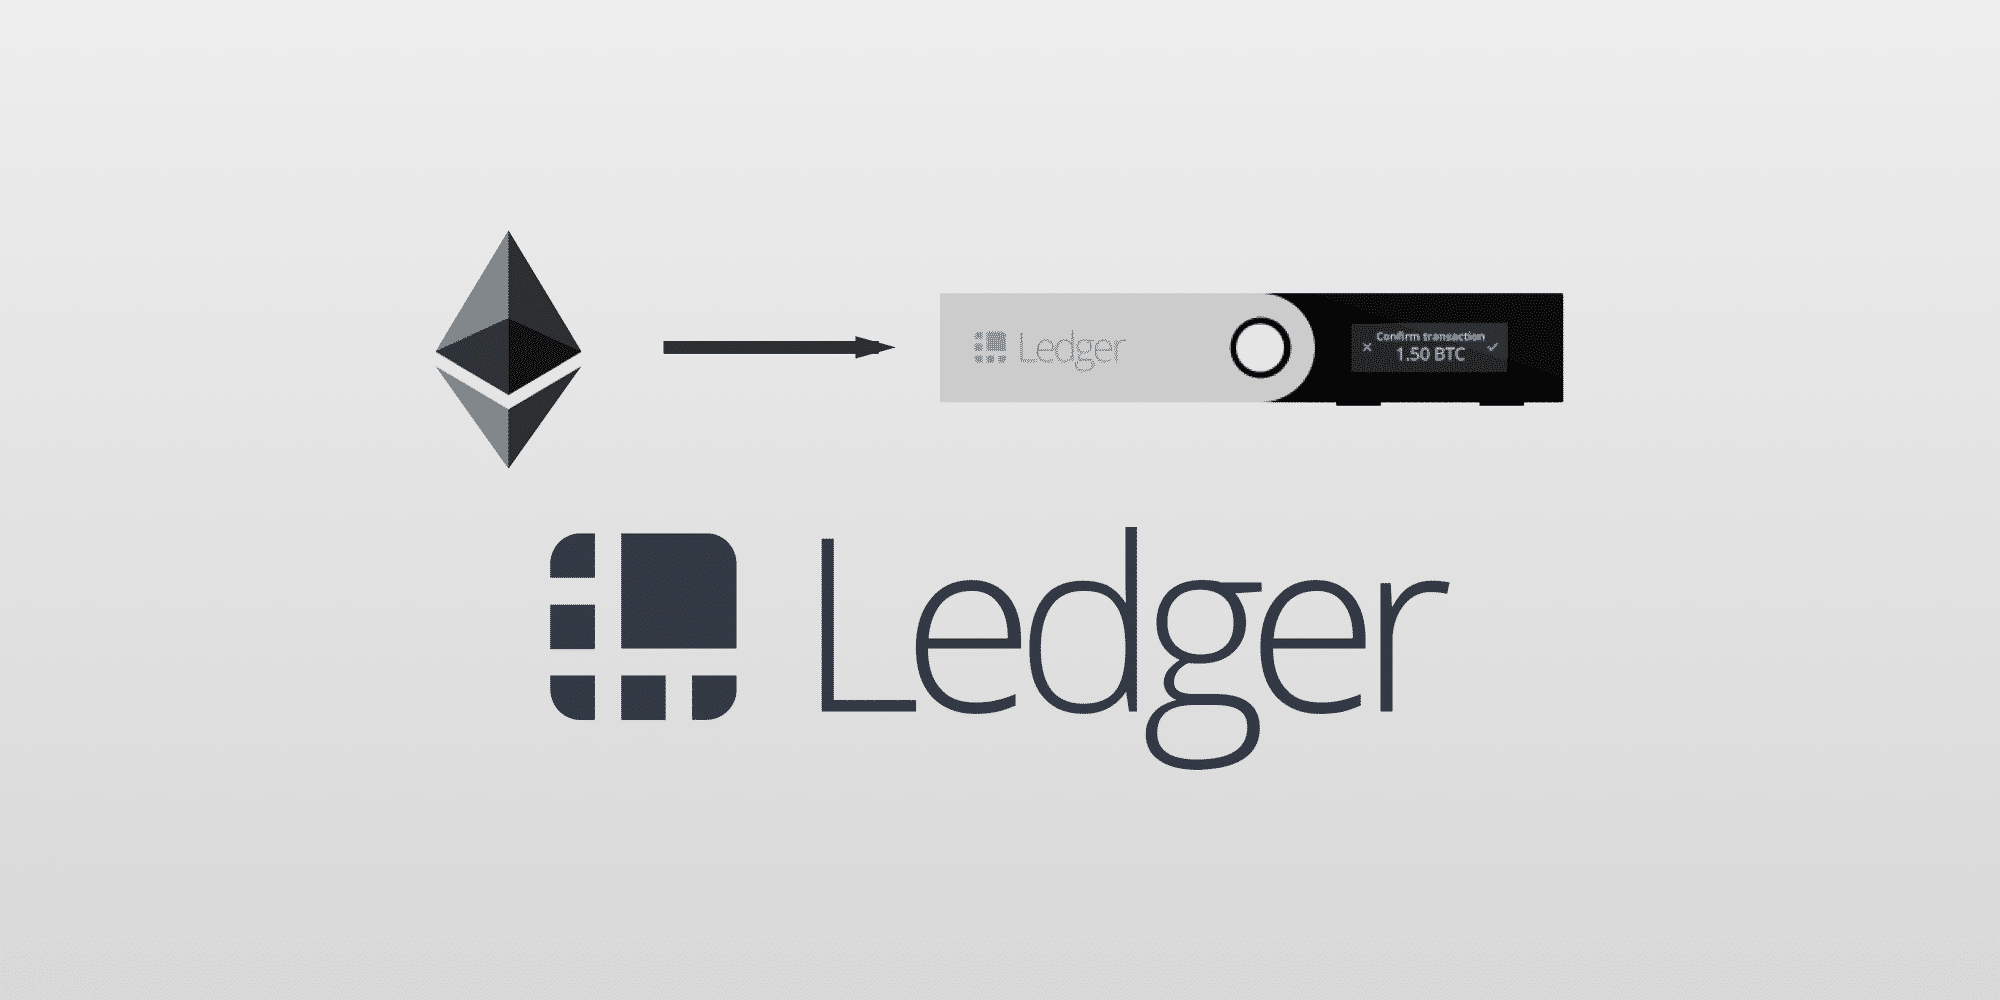 How to send ETH to a Ledger Nano S device? | Bitcoin Exchange and Trading Platform ∣ BtcPremium